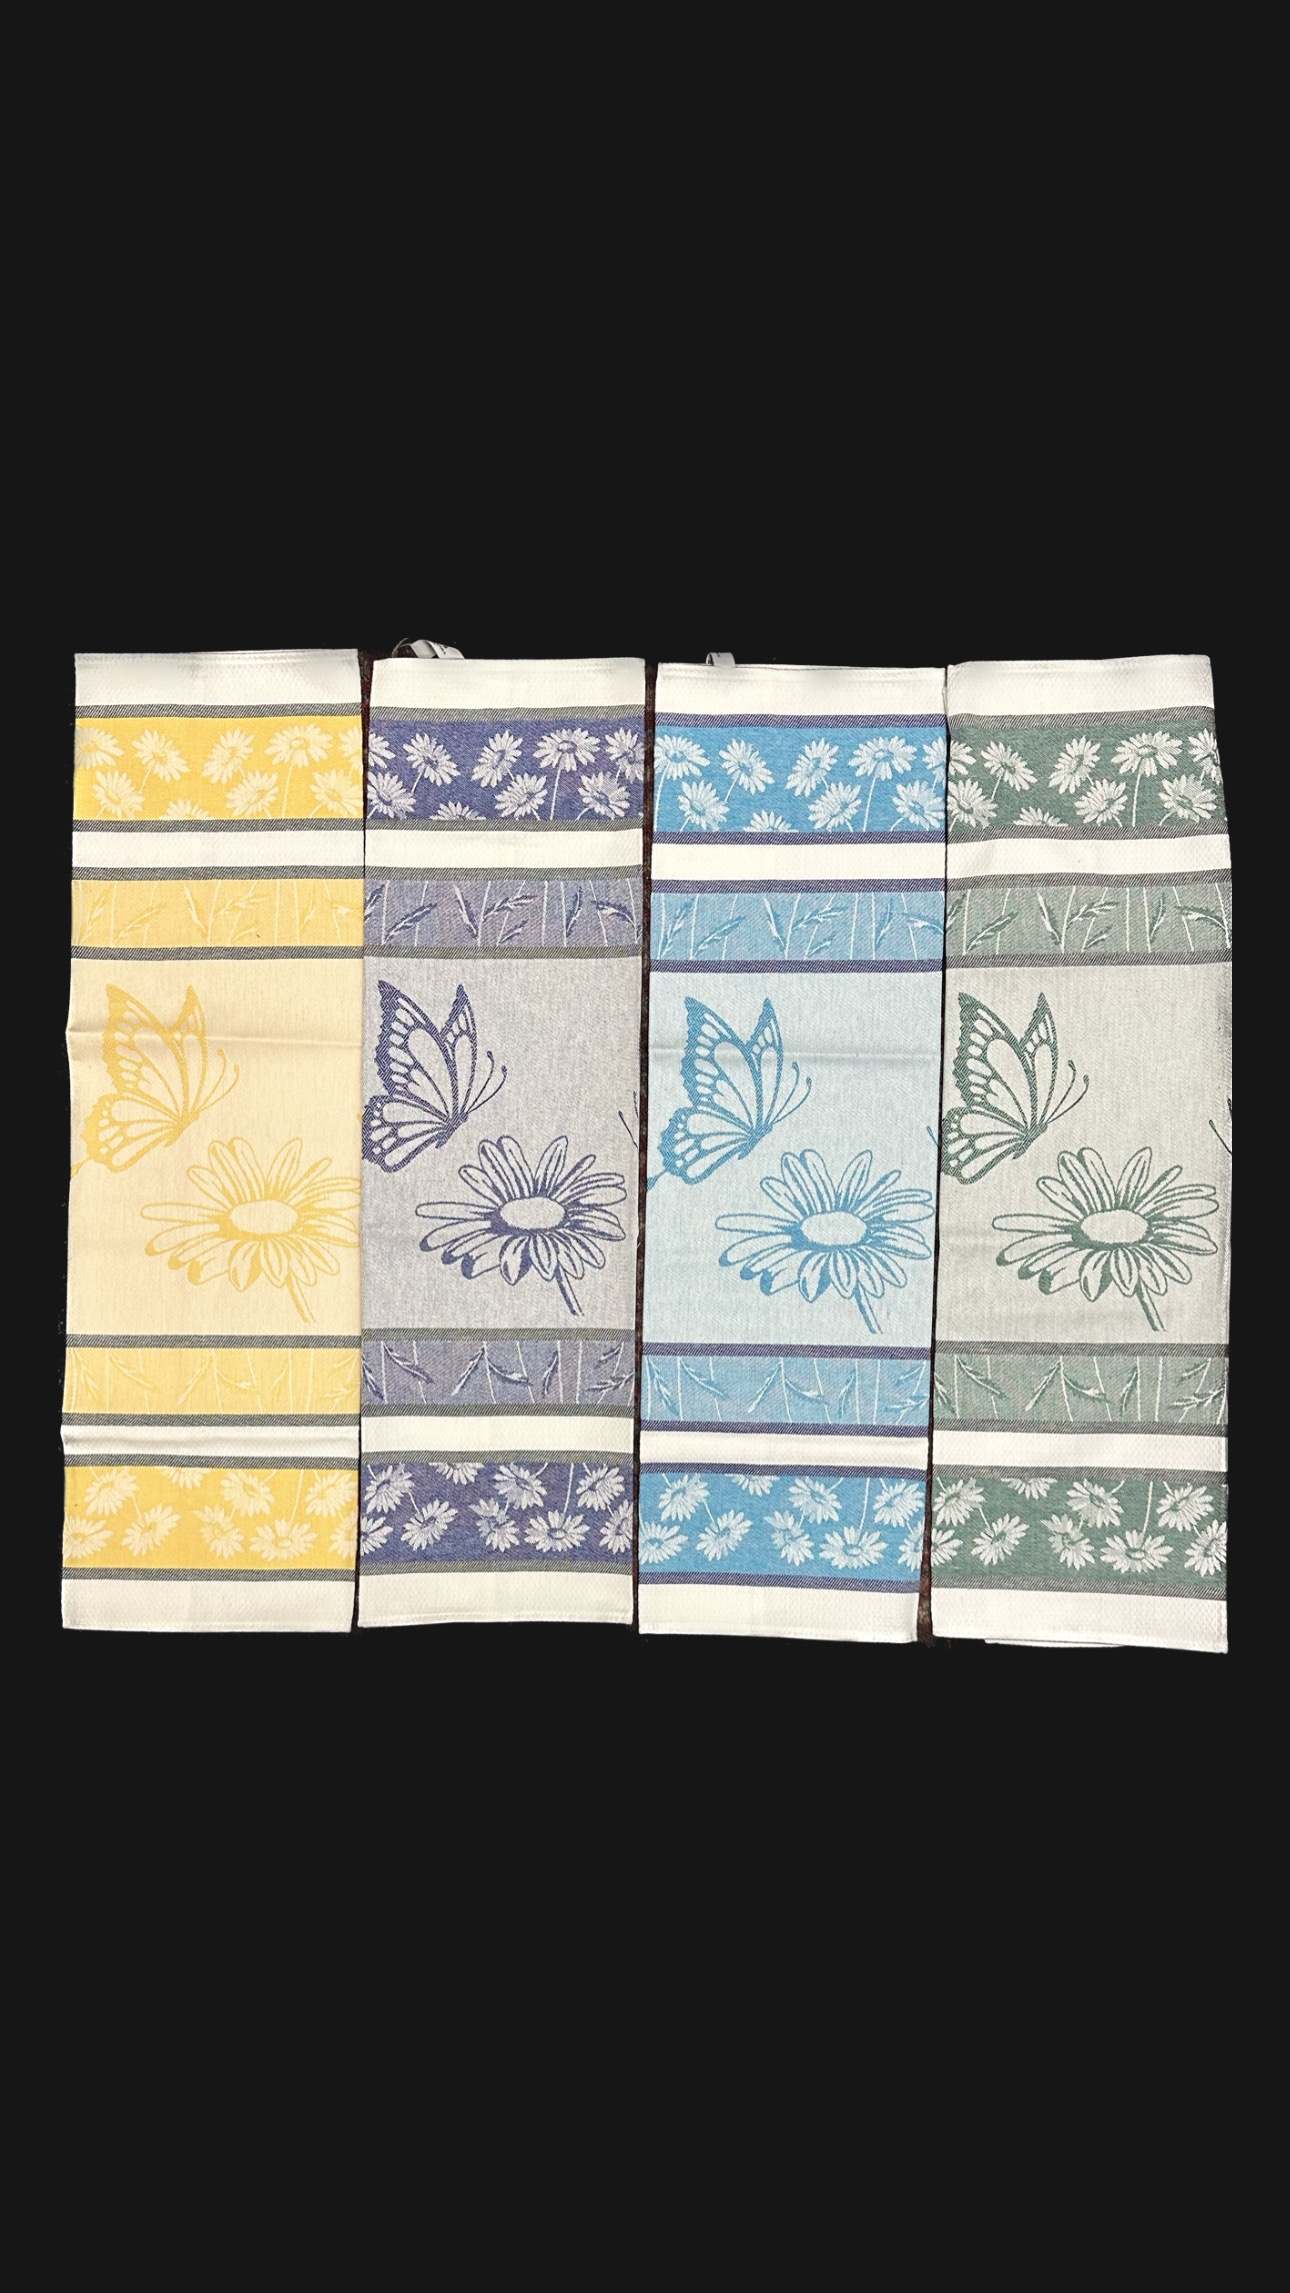 Edelweiss Jacquard Woven Kitchen Tea Towels – Side Variation